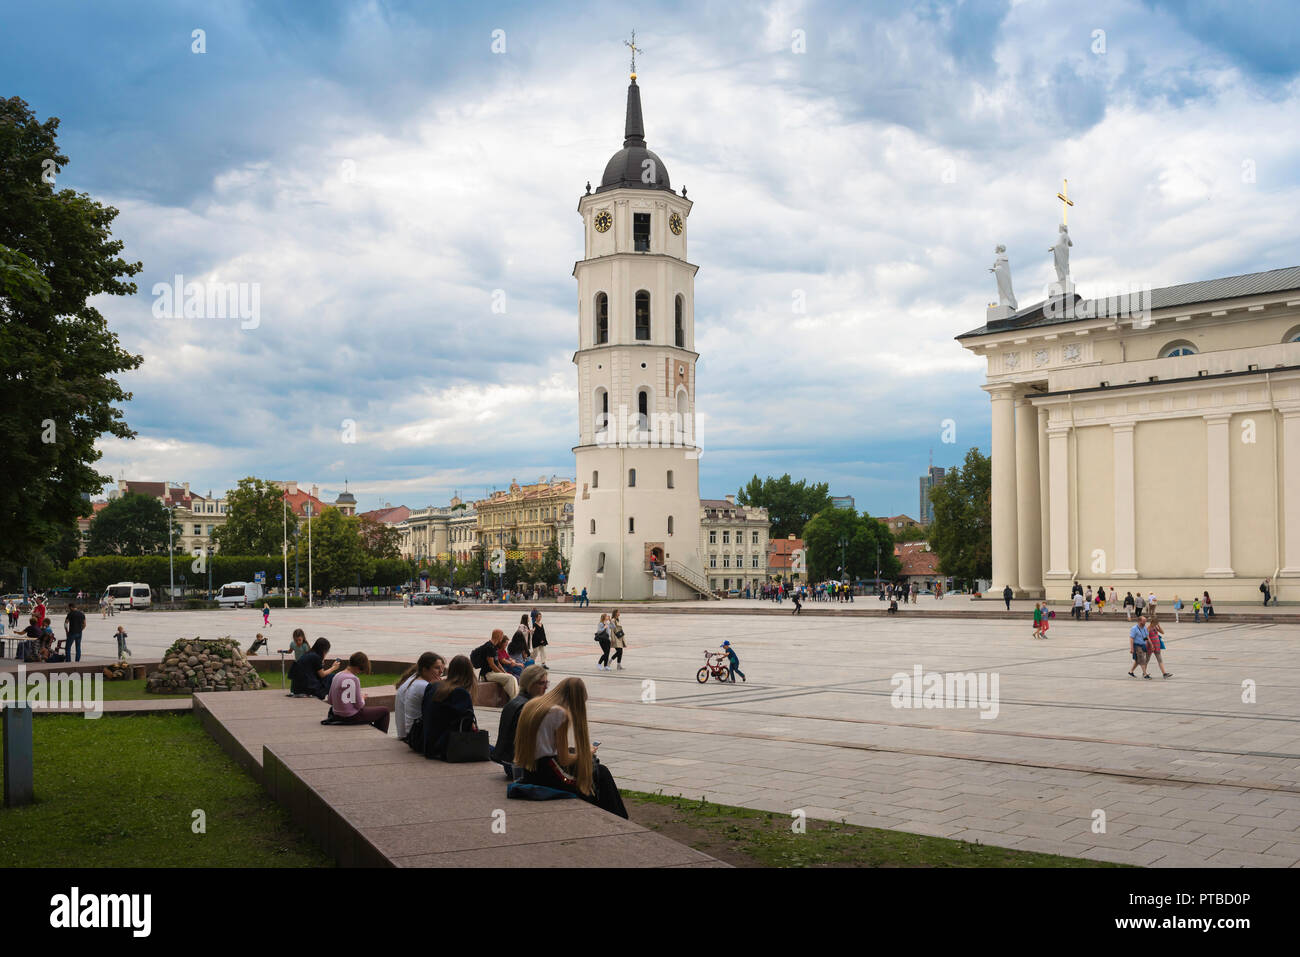 Vilnius Cathedral Square, view of people sitting in Cathedral Square with the Belfry tower and west end of the cathedral in the distance, Lithuania. Stock Photo